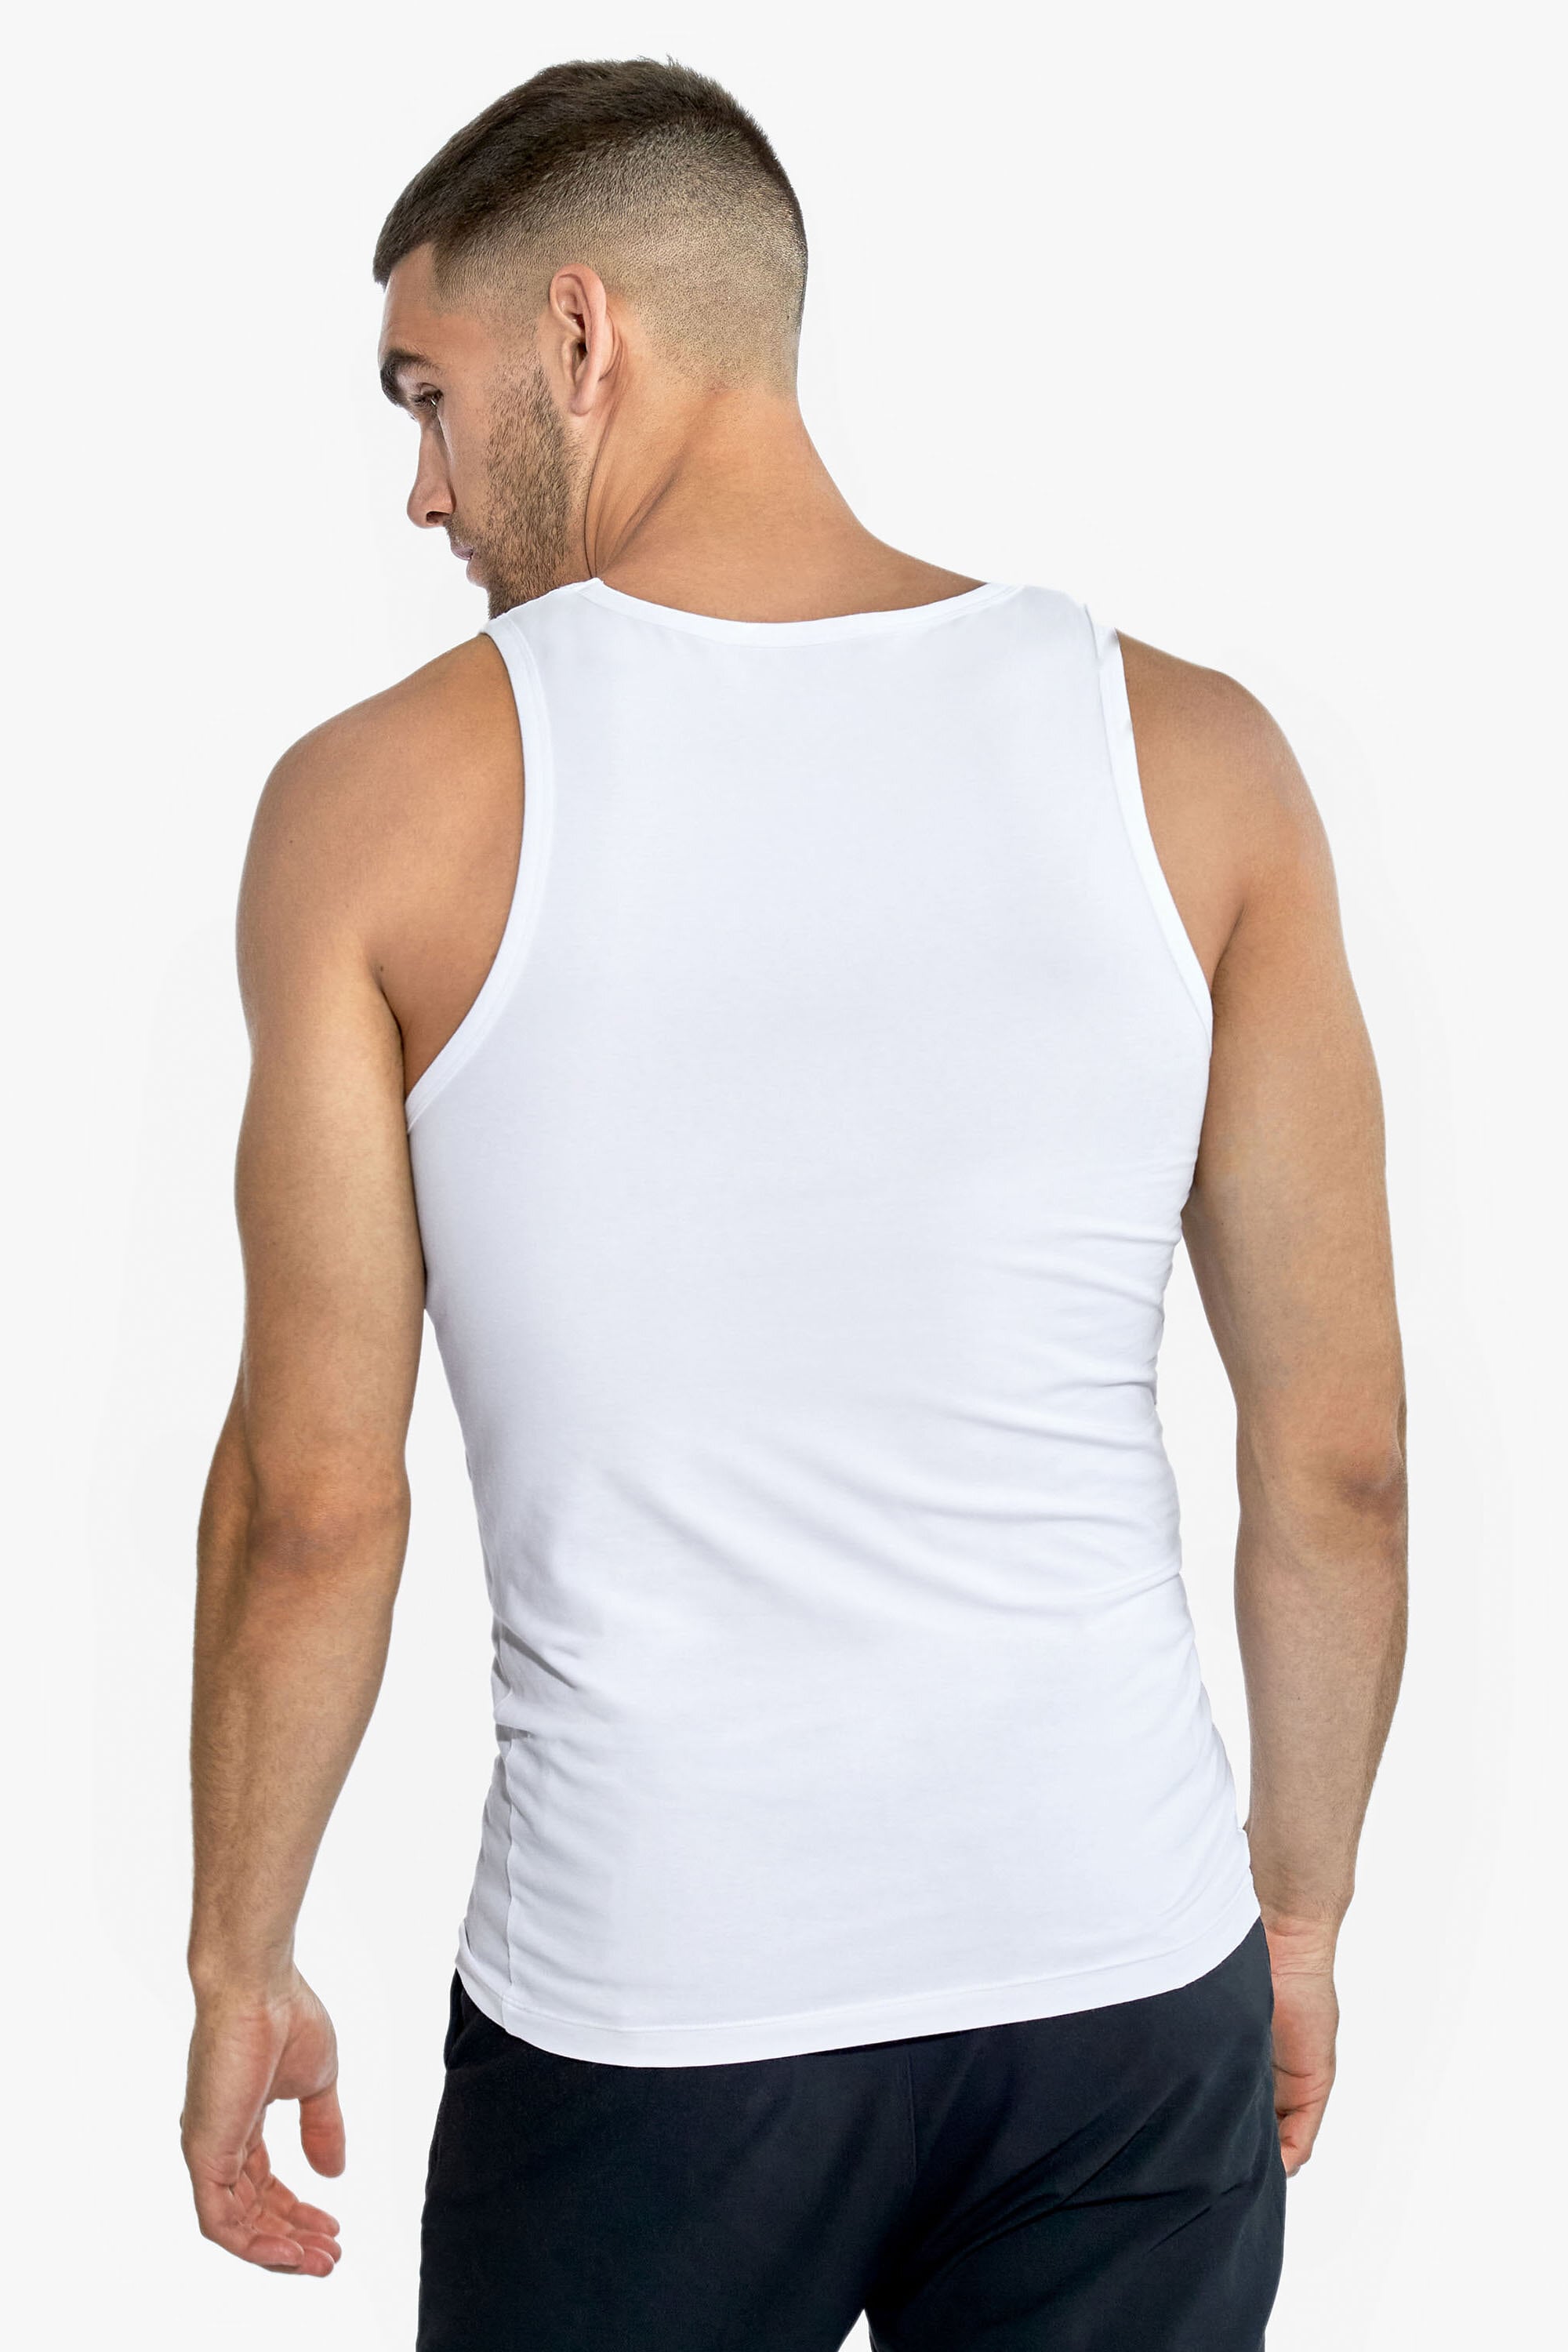 Details about   2020 Ins White Rib Stretch Organic Cotton Tank Tops